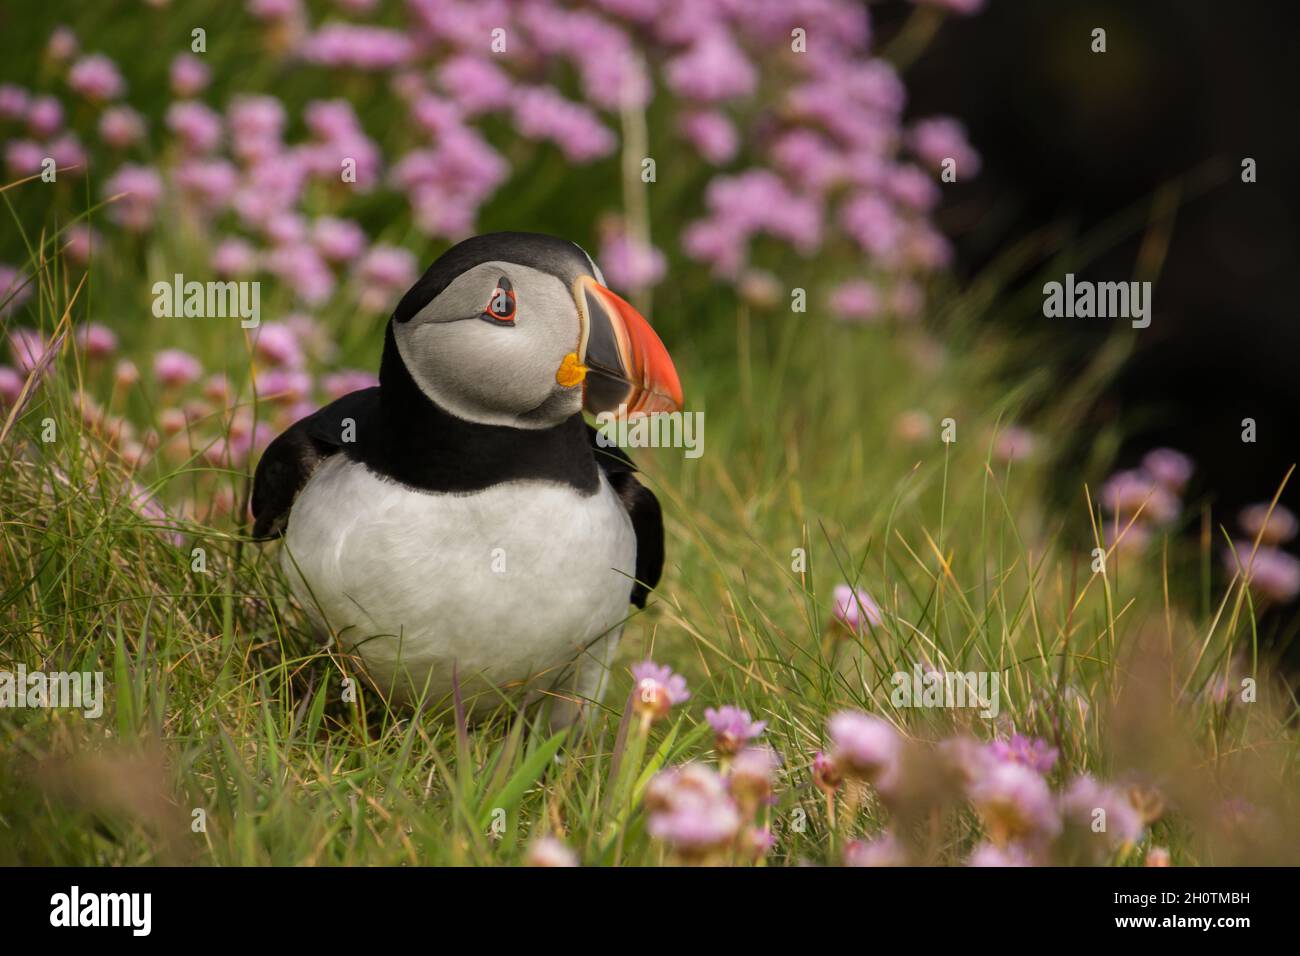 Atlantic puffin sitting amongst a field of pink thrift flowers on a grassy cliff Stock Photo